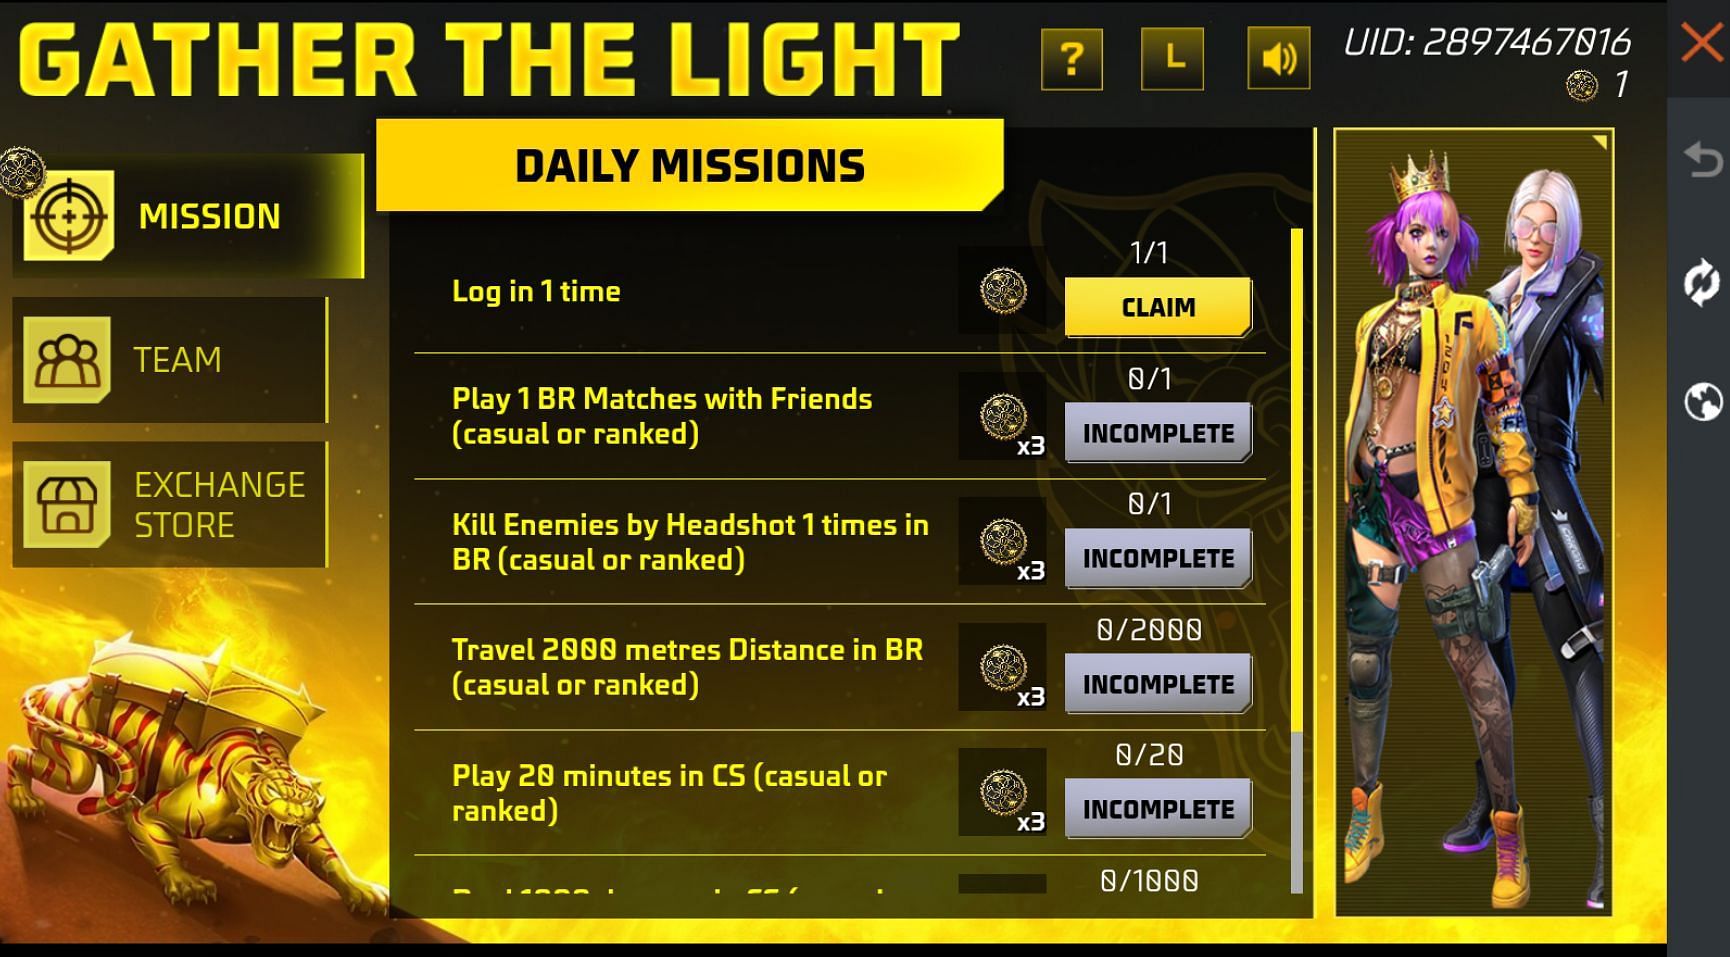 Missions to get Light tokens in the game (Image via Garena)